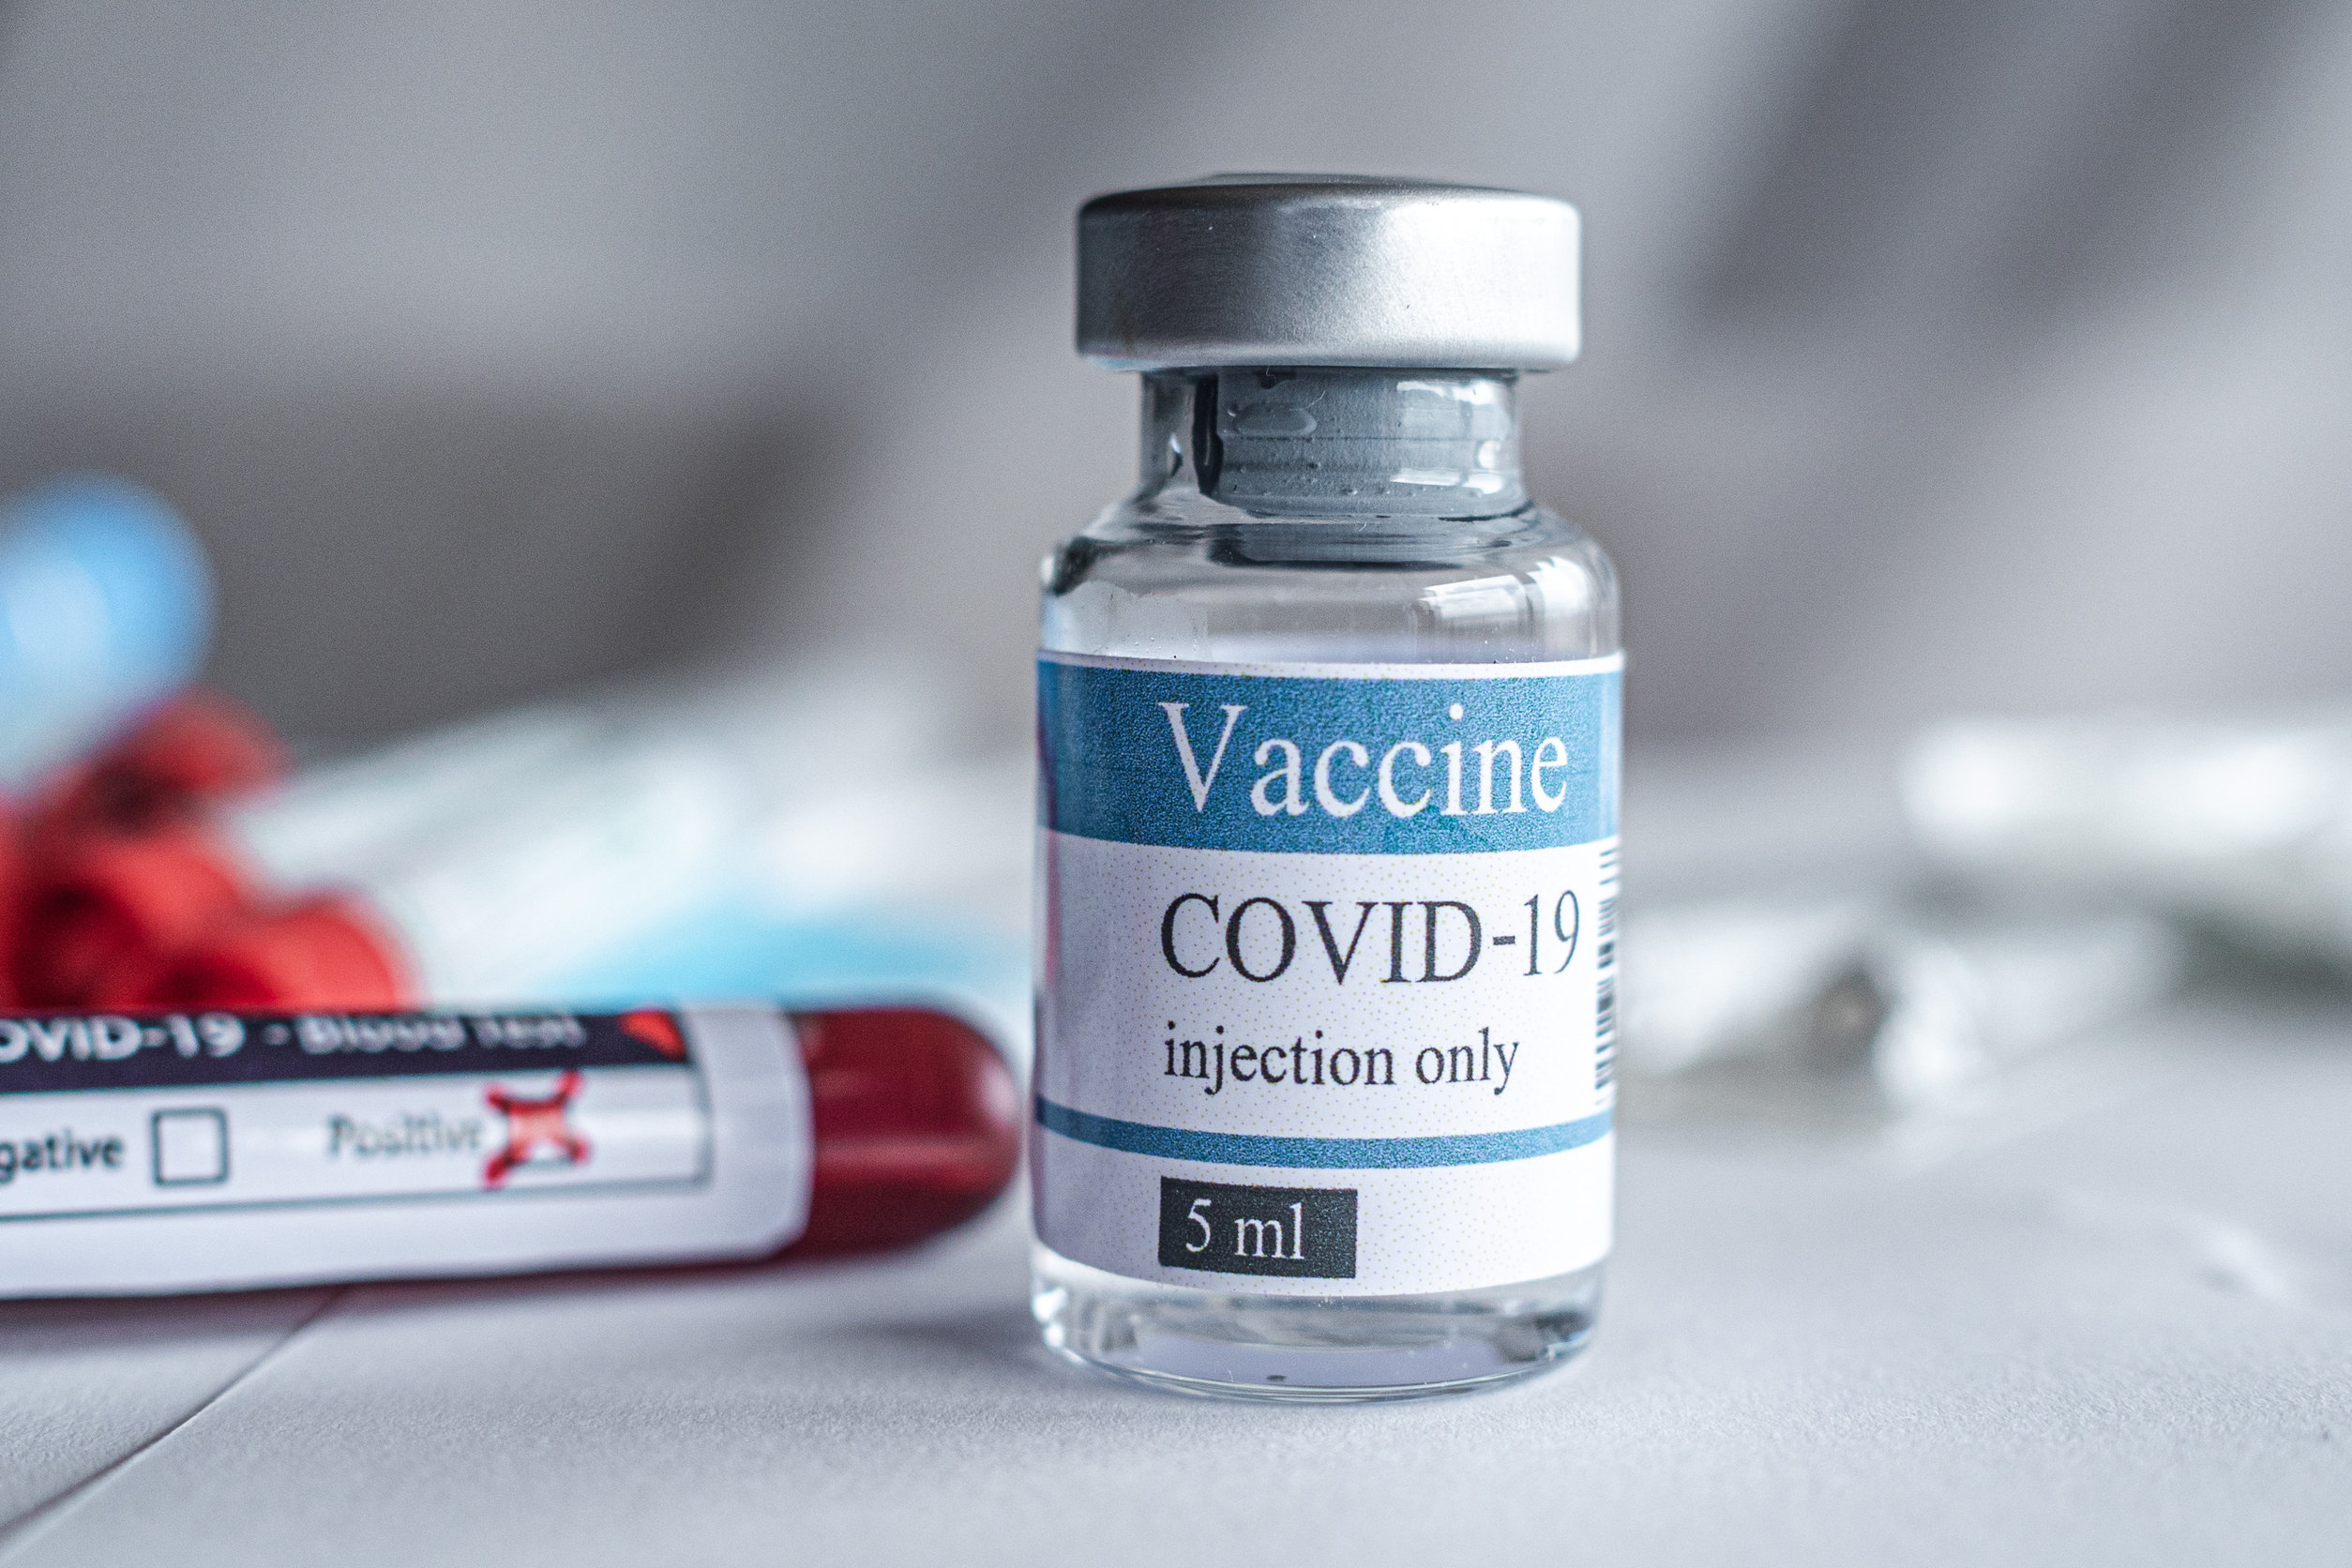 How Safe and Effective are the COVID-19 vaccines?